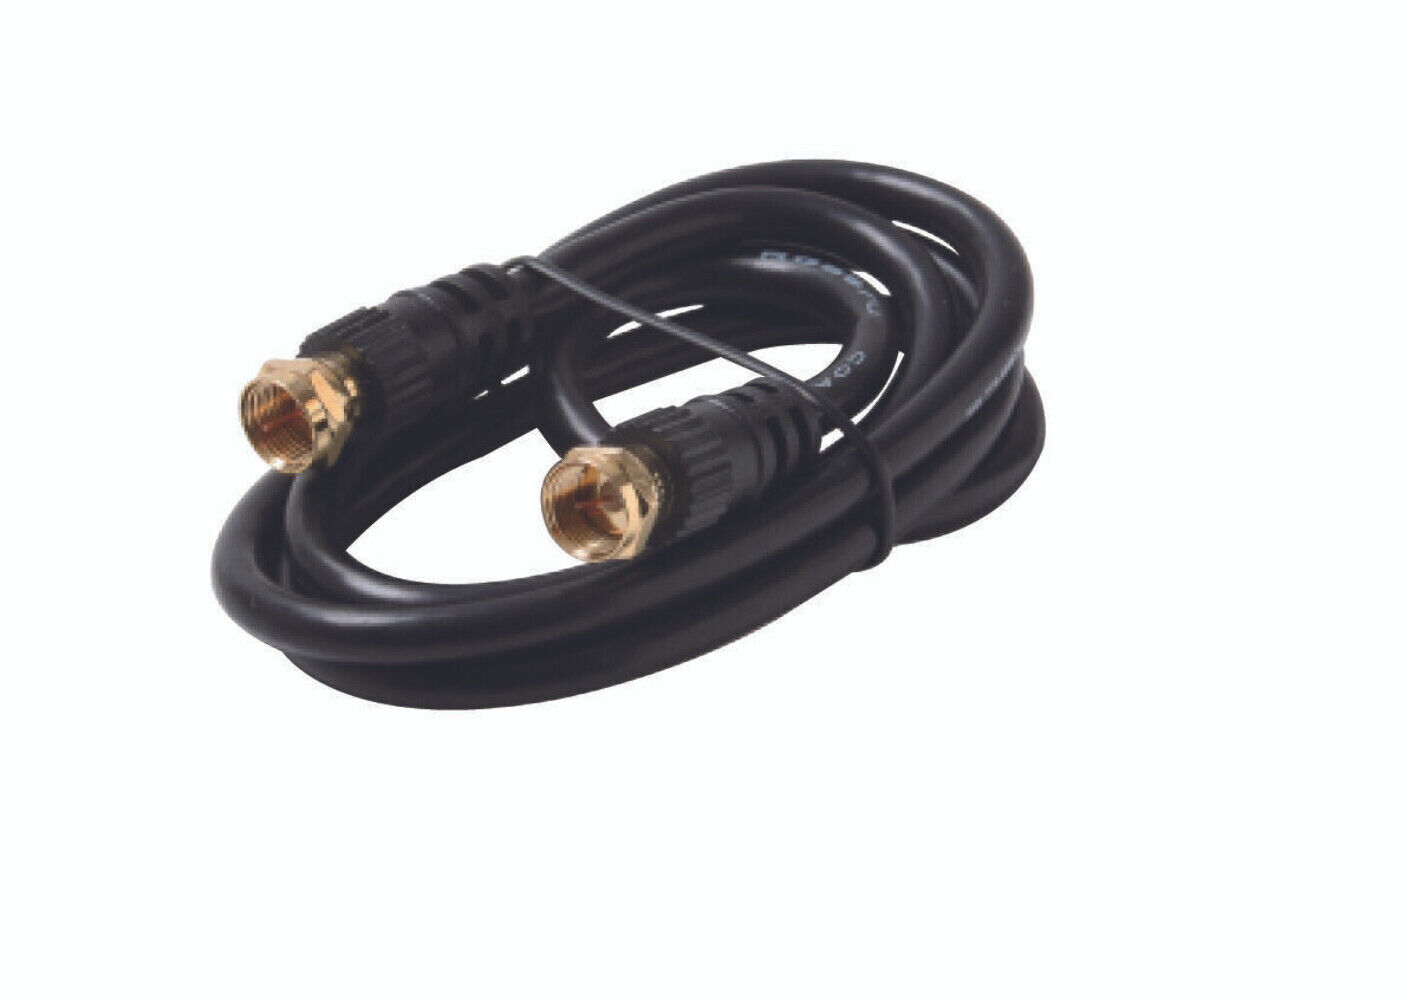 Steren 6ft RG59 Cable with F connectors Black